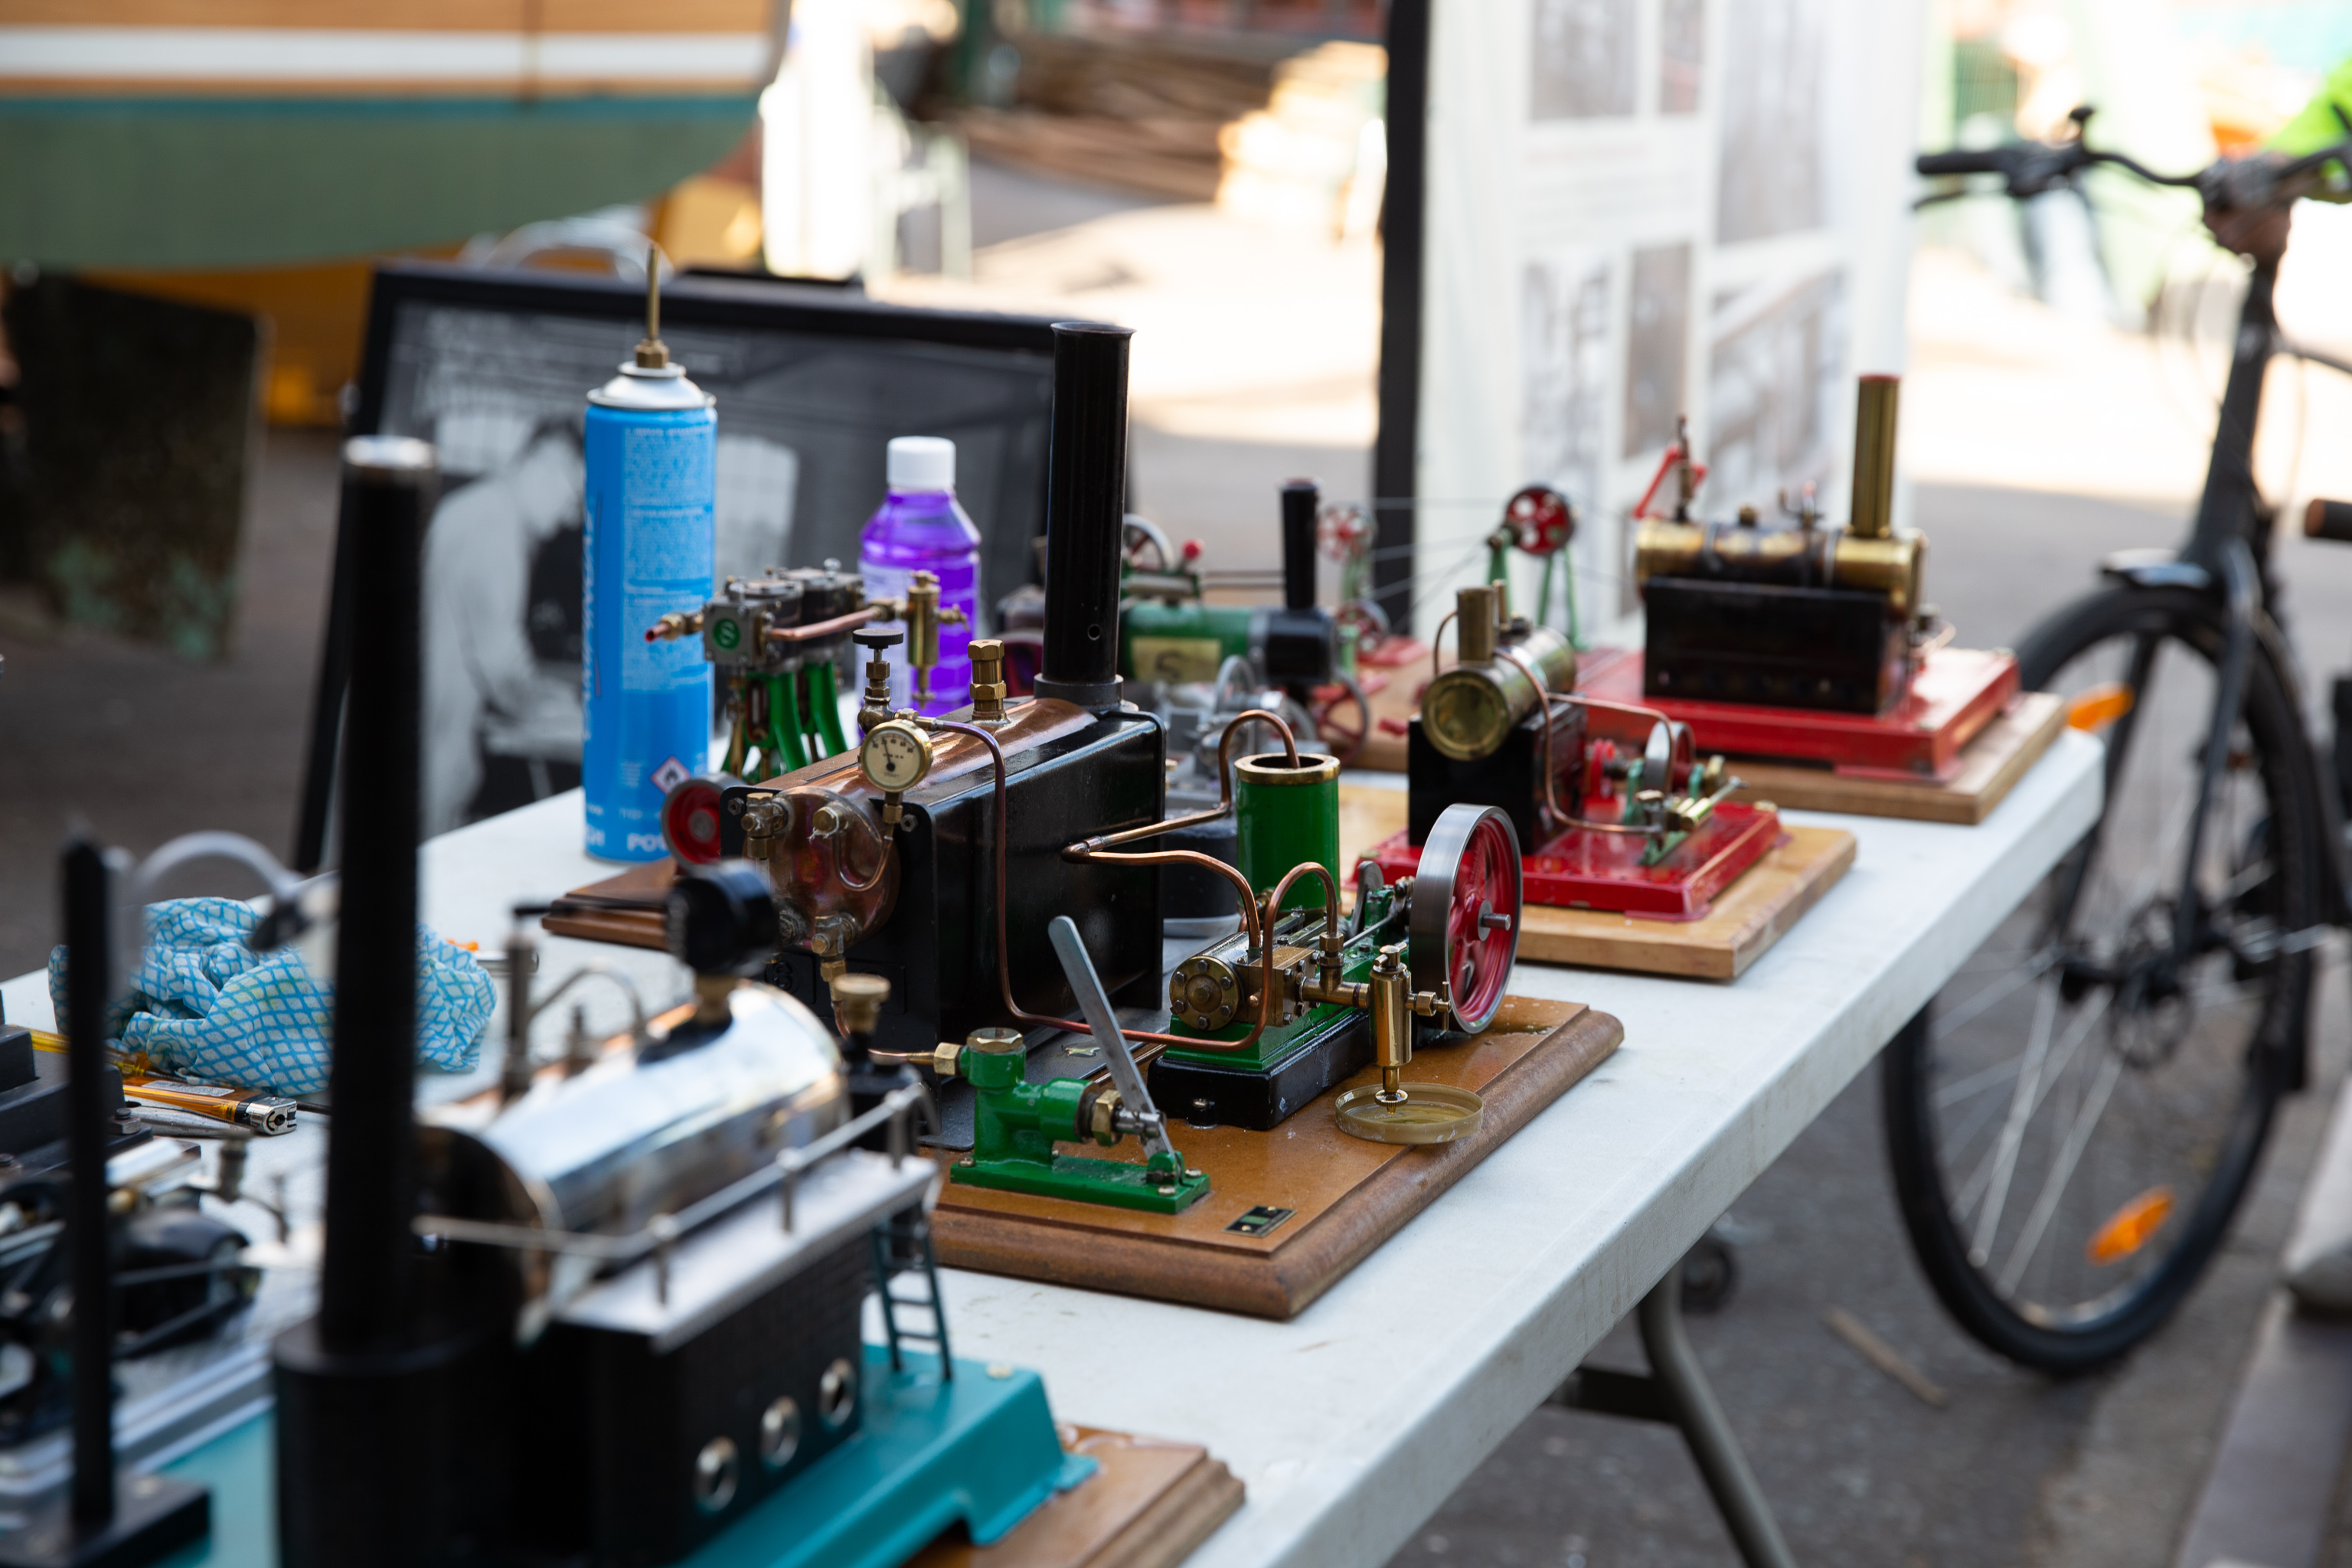 Steam Engines
Part of the open day was this delightful collection of miniature steam engines and an on-demand explanation of how steam power works for anyone who...